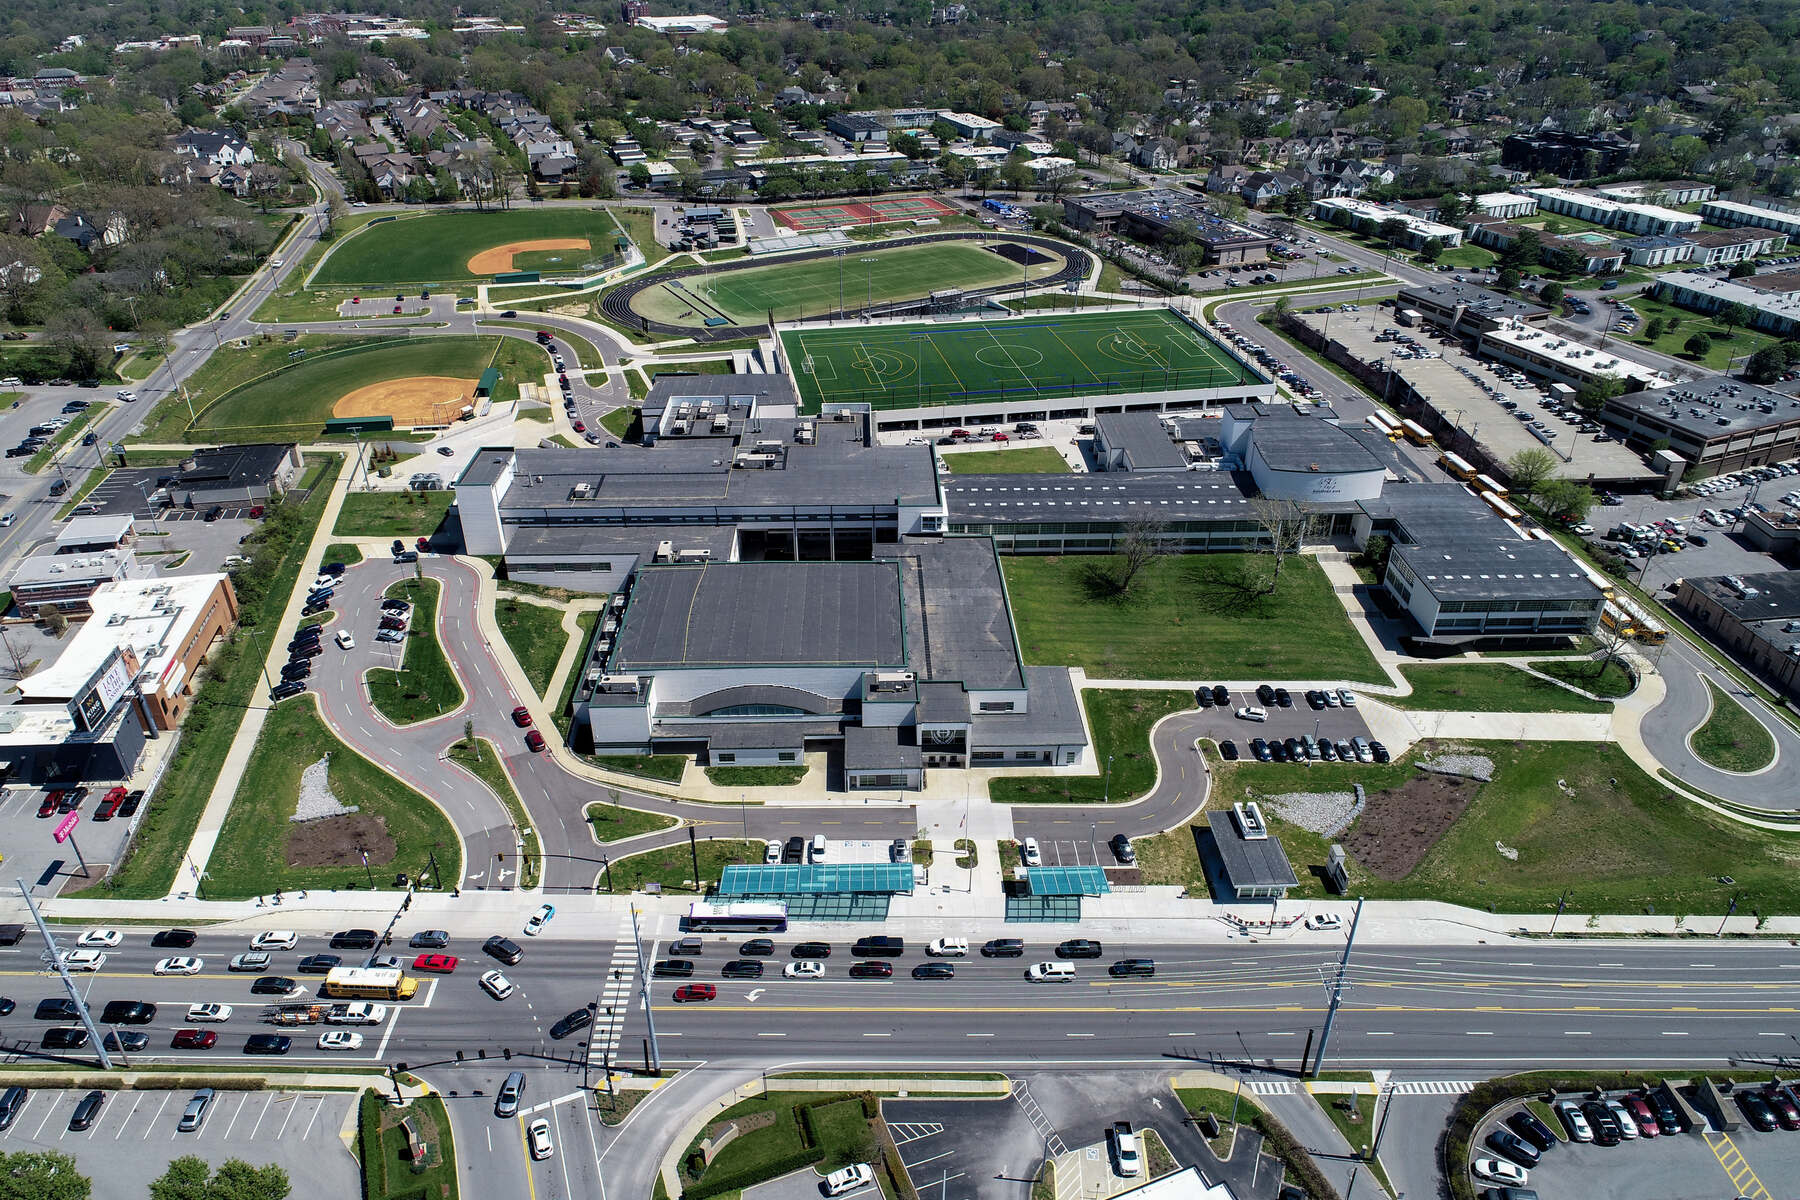 A drone shot of a high school campus